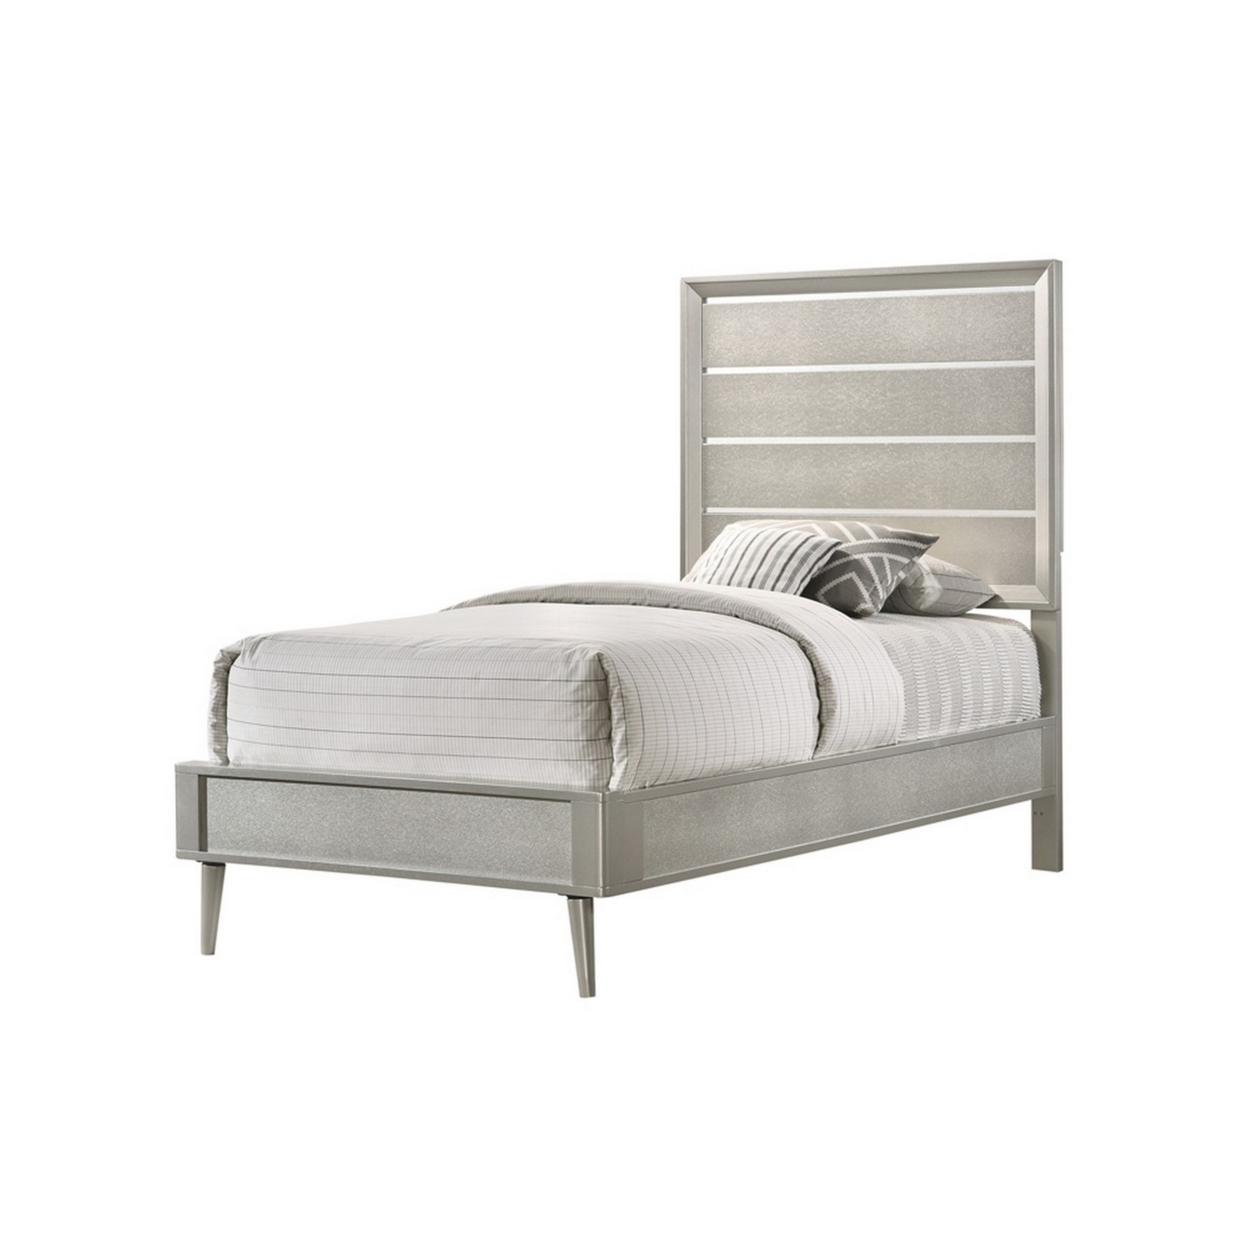 Panel Design Twin Bed With Plank Style Headboard And Mirror Inlay, Silver- Saltoro Sherpi